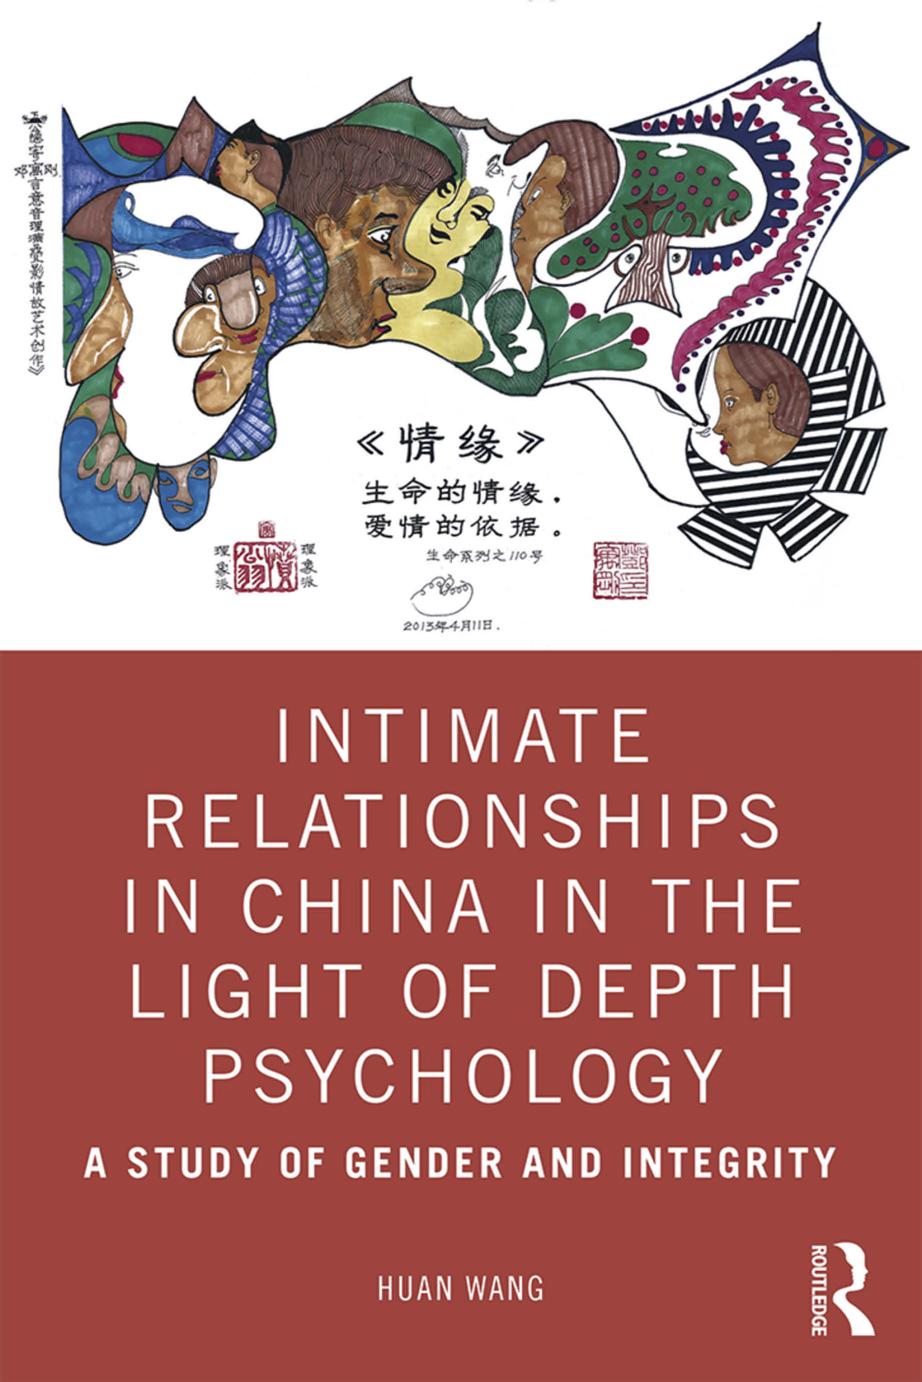 (eBook PDF)Intimate Relationships in China in the Light of Depth Psychology A Study of Gender and Integrity - Huan Wang by Huan Wang 